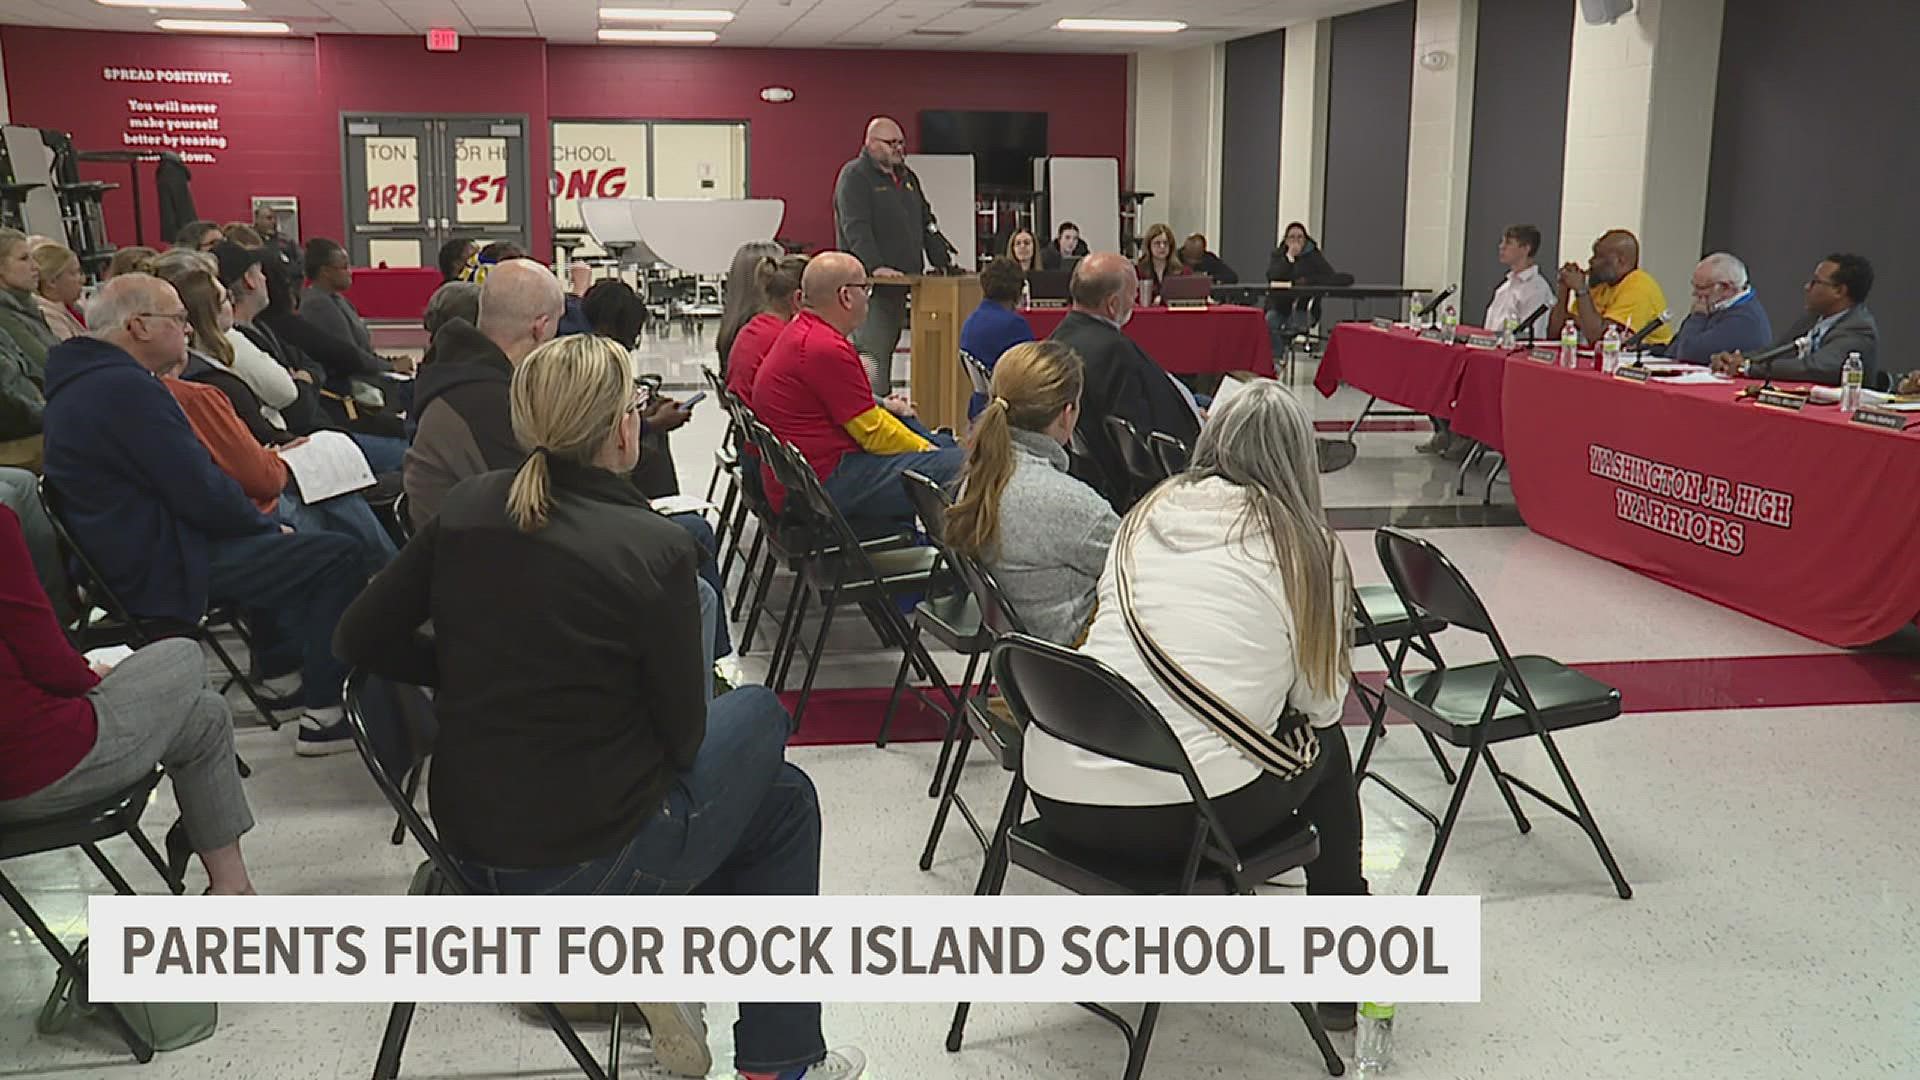 Over a dozen parents shared their concerns during the public comment portion of the board meeting regarding the dire state of the high school pool.